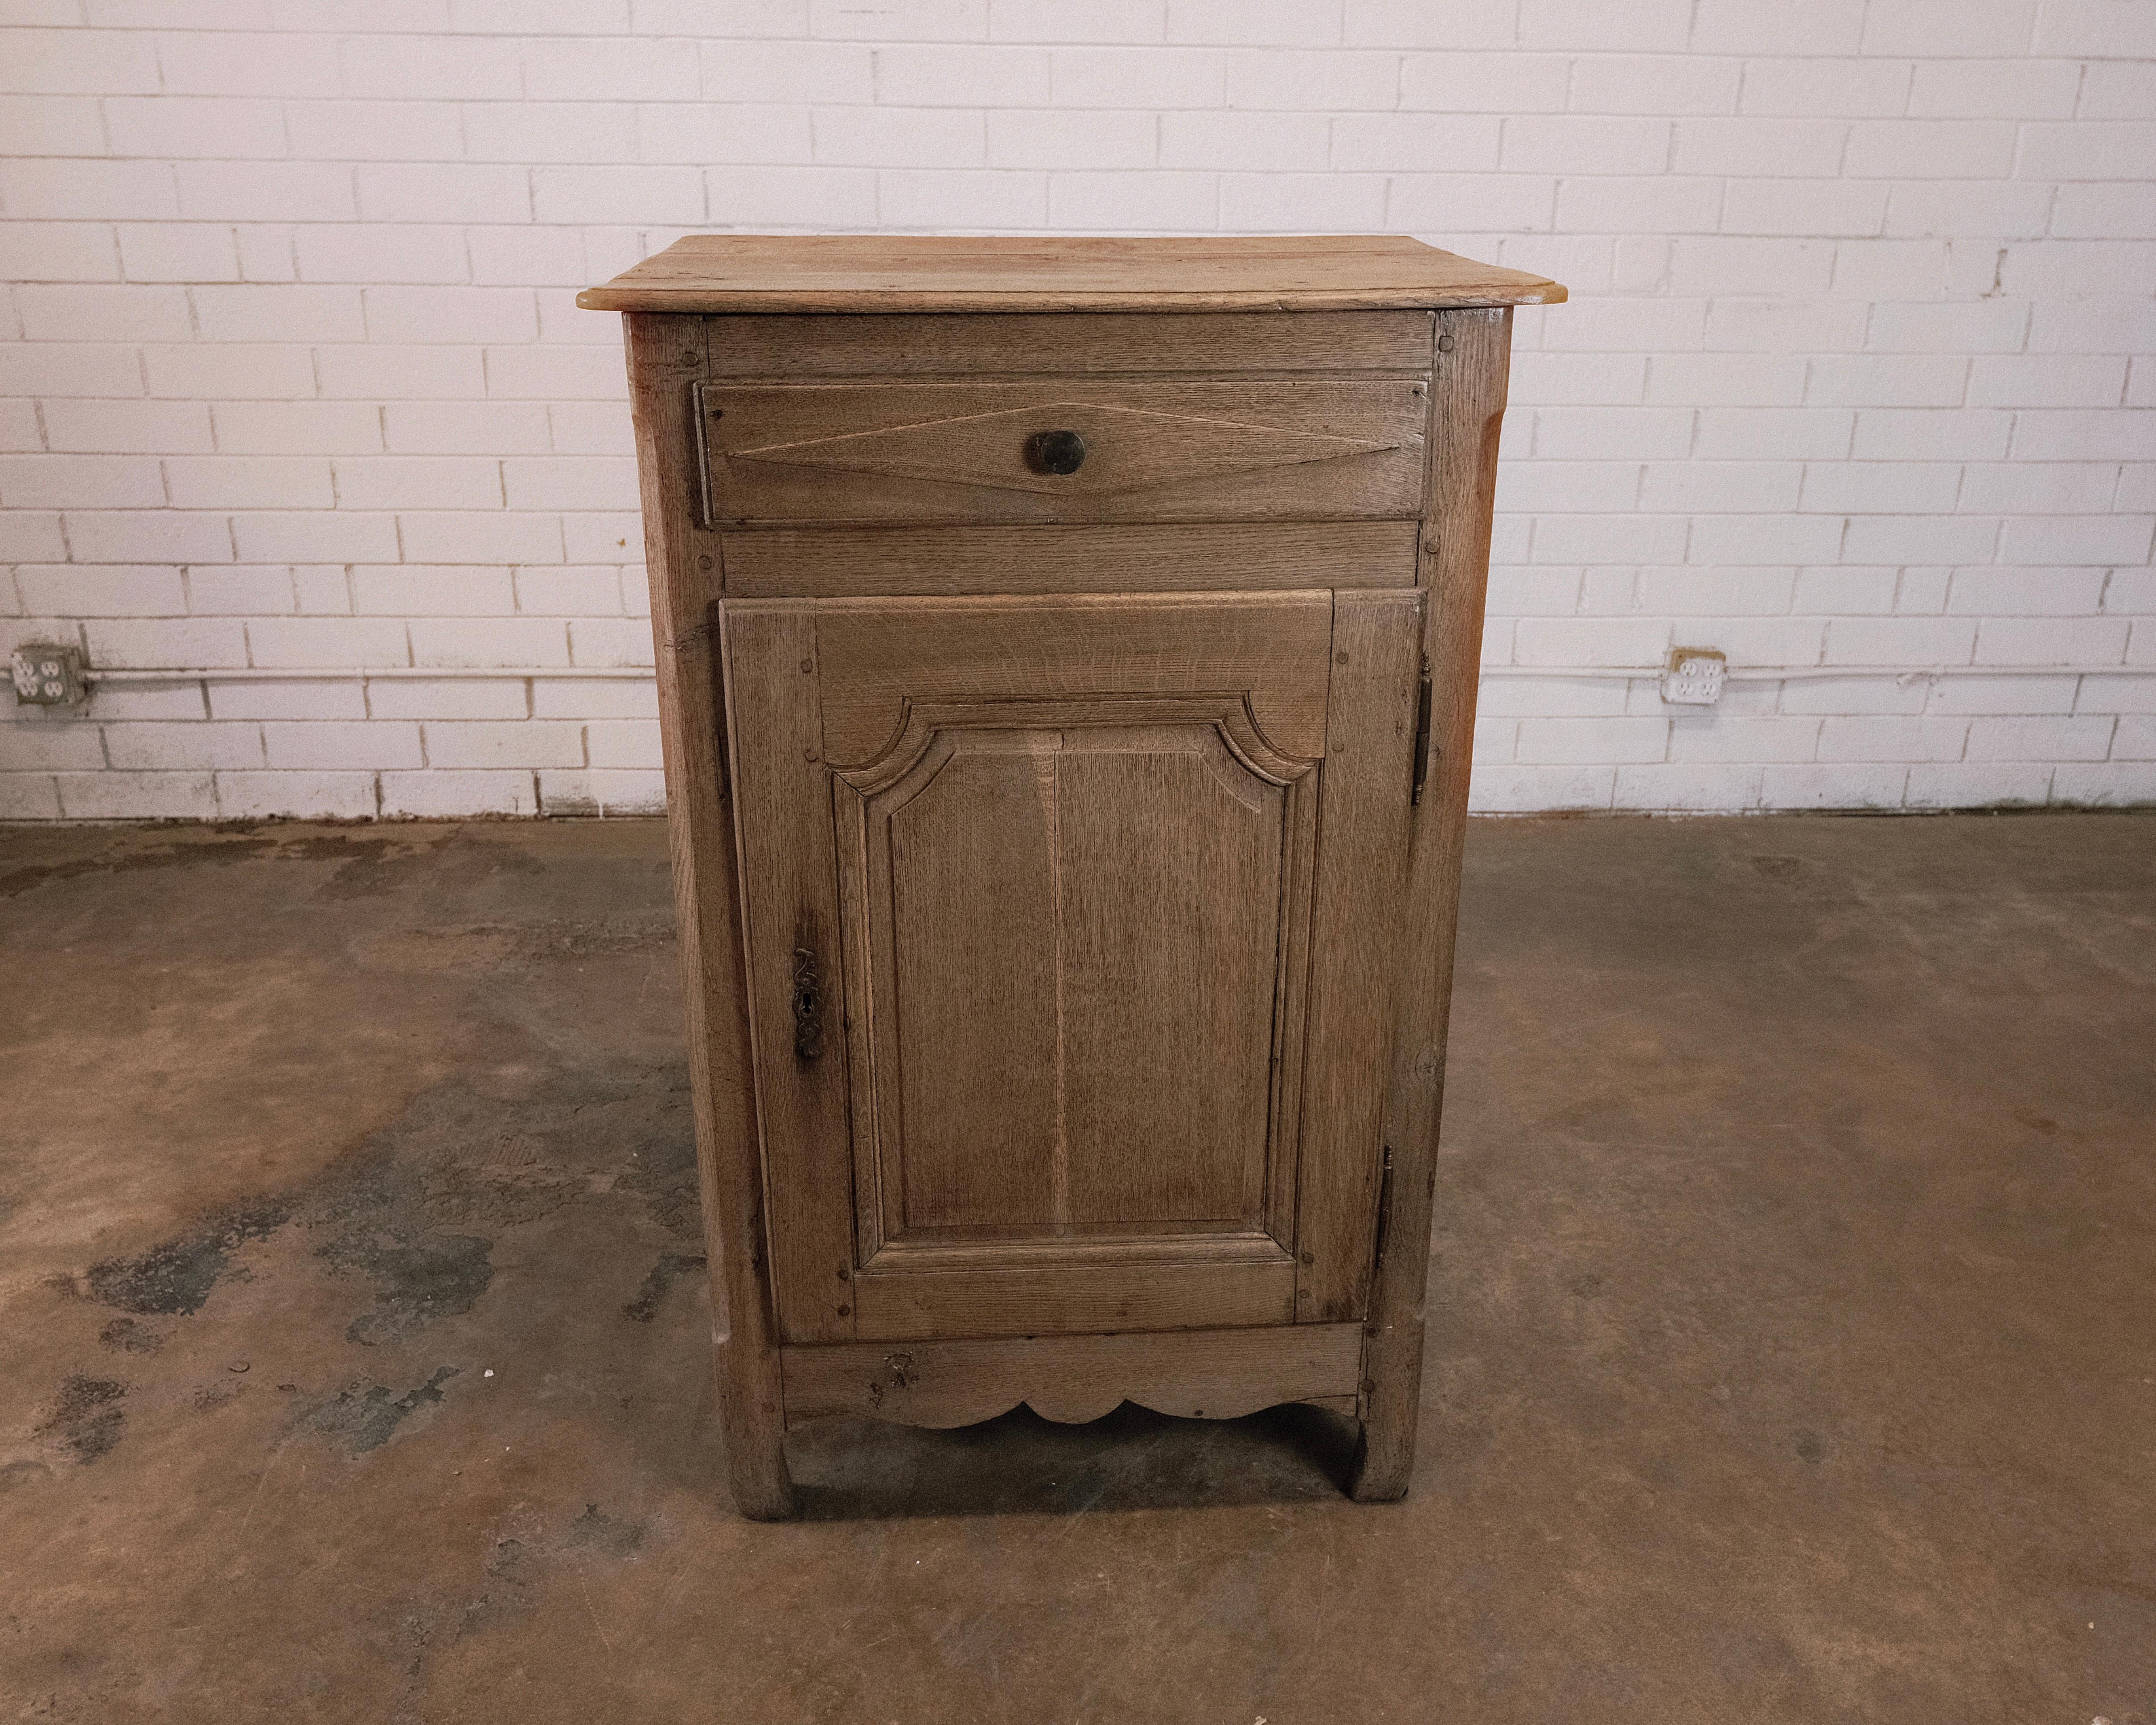 Step into the world of refined culinary elegance with this charming French Louis XV style confiture, a single-door cabinet designed for the storage of jams, preserves, and other culinary delights. This piece embodies the essence of the Louis XV era,